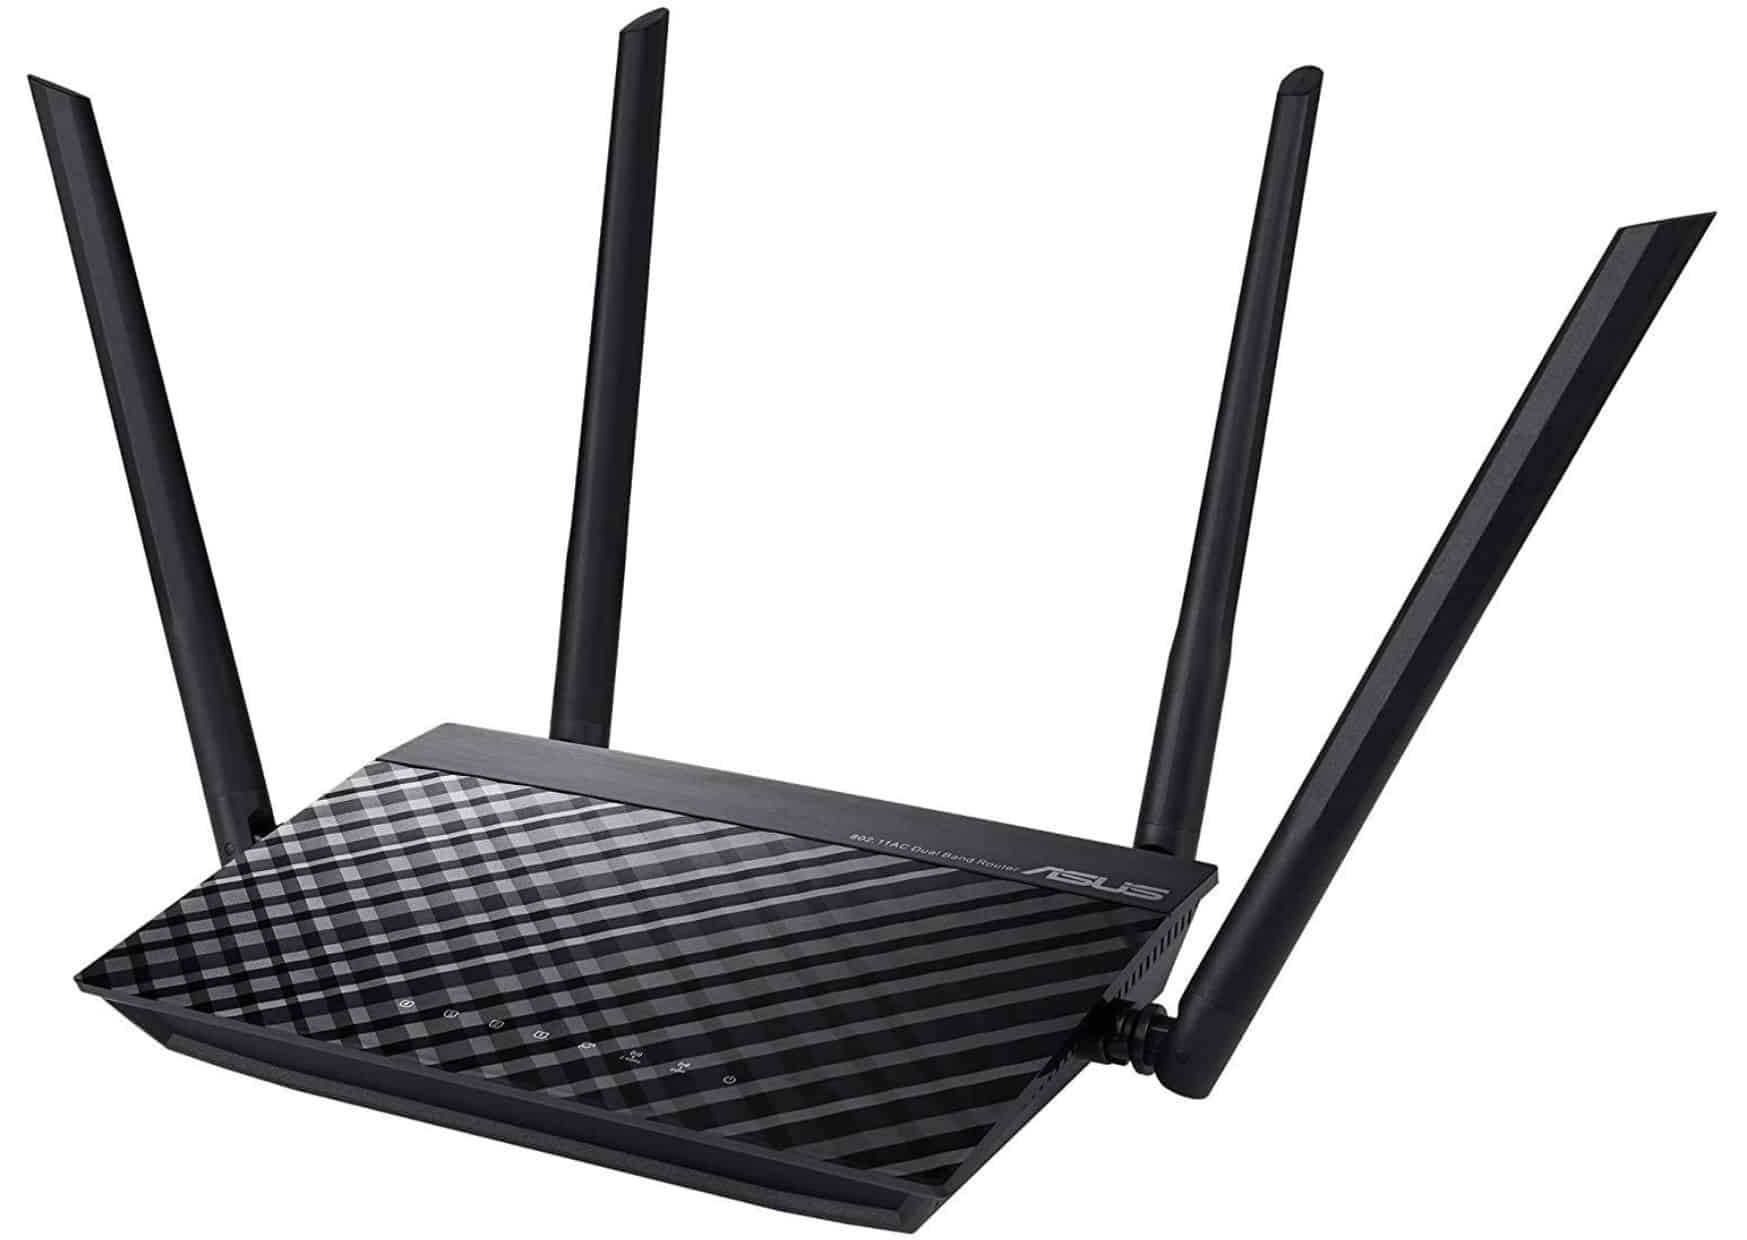 10 Best WiFi Routers for Working From Home Productively